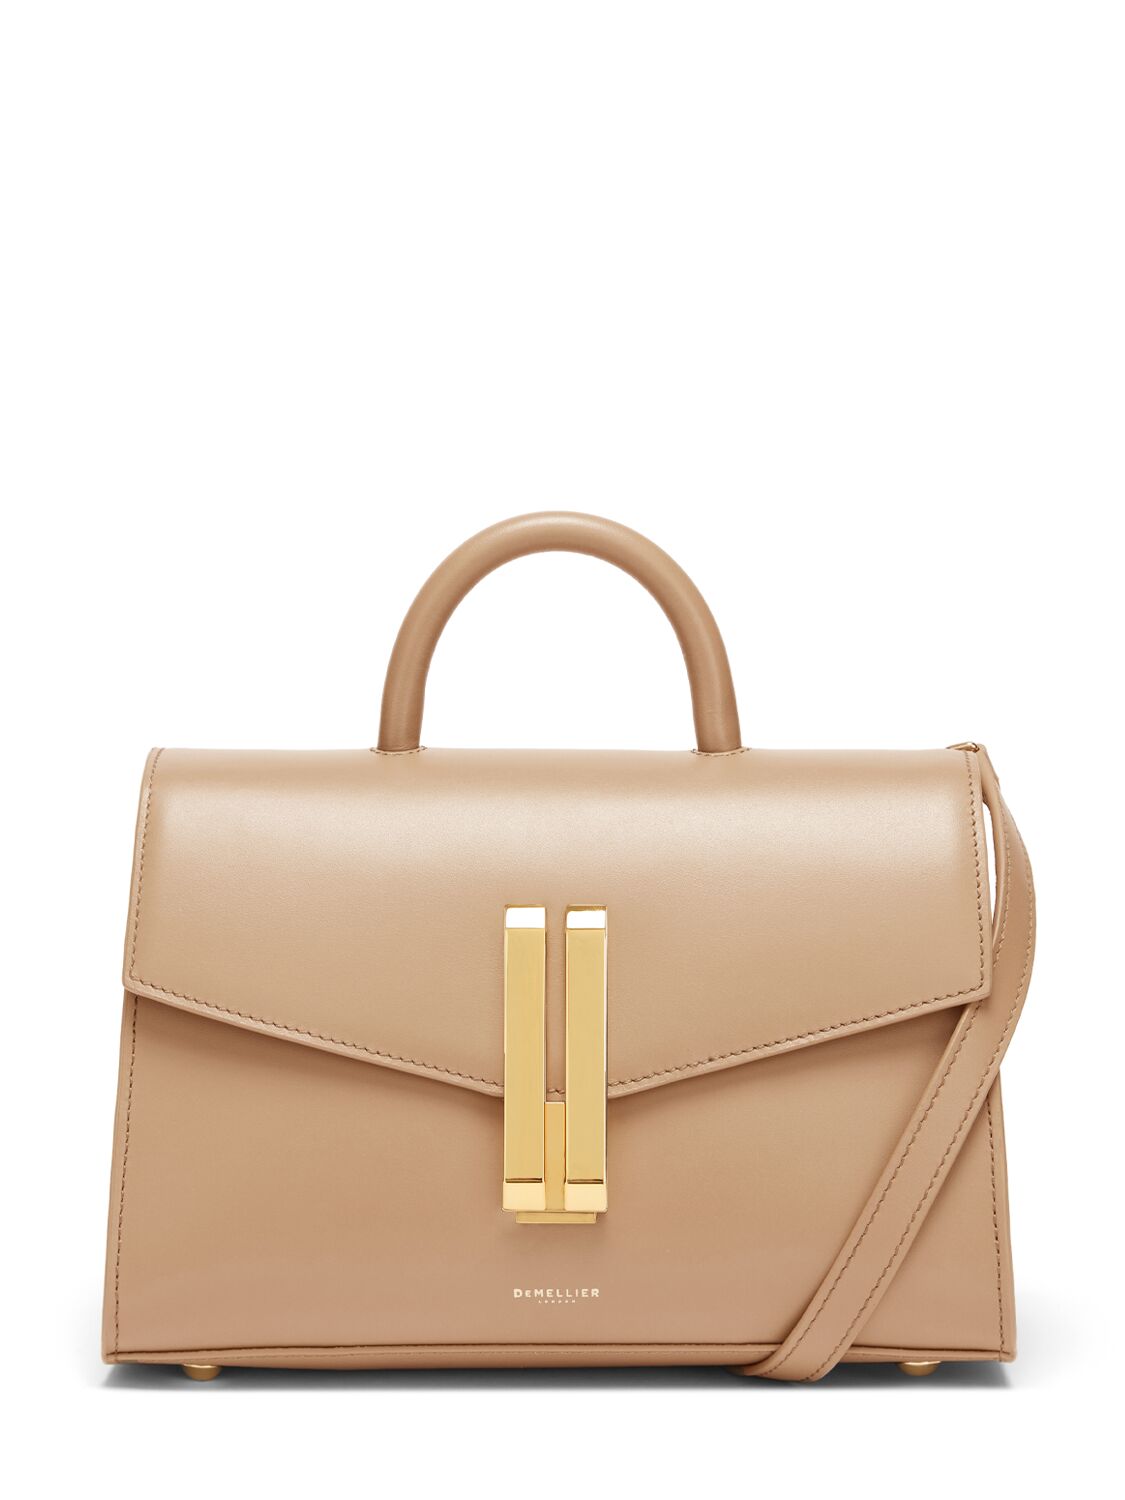 Demellier Midi Montreal Smooth Leather Bag In Light Tan